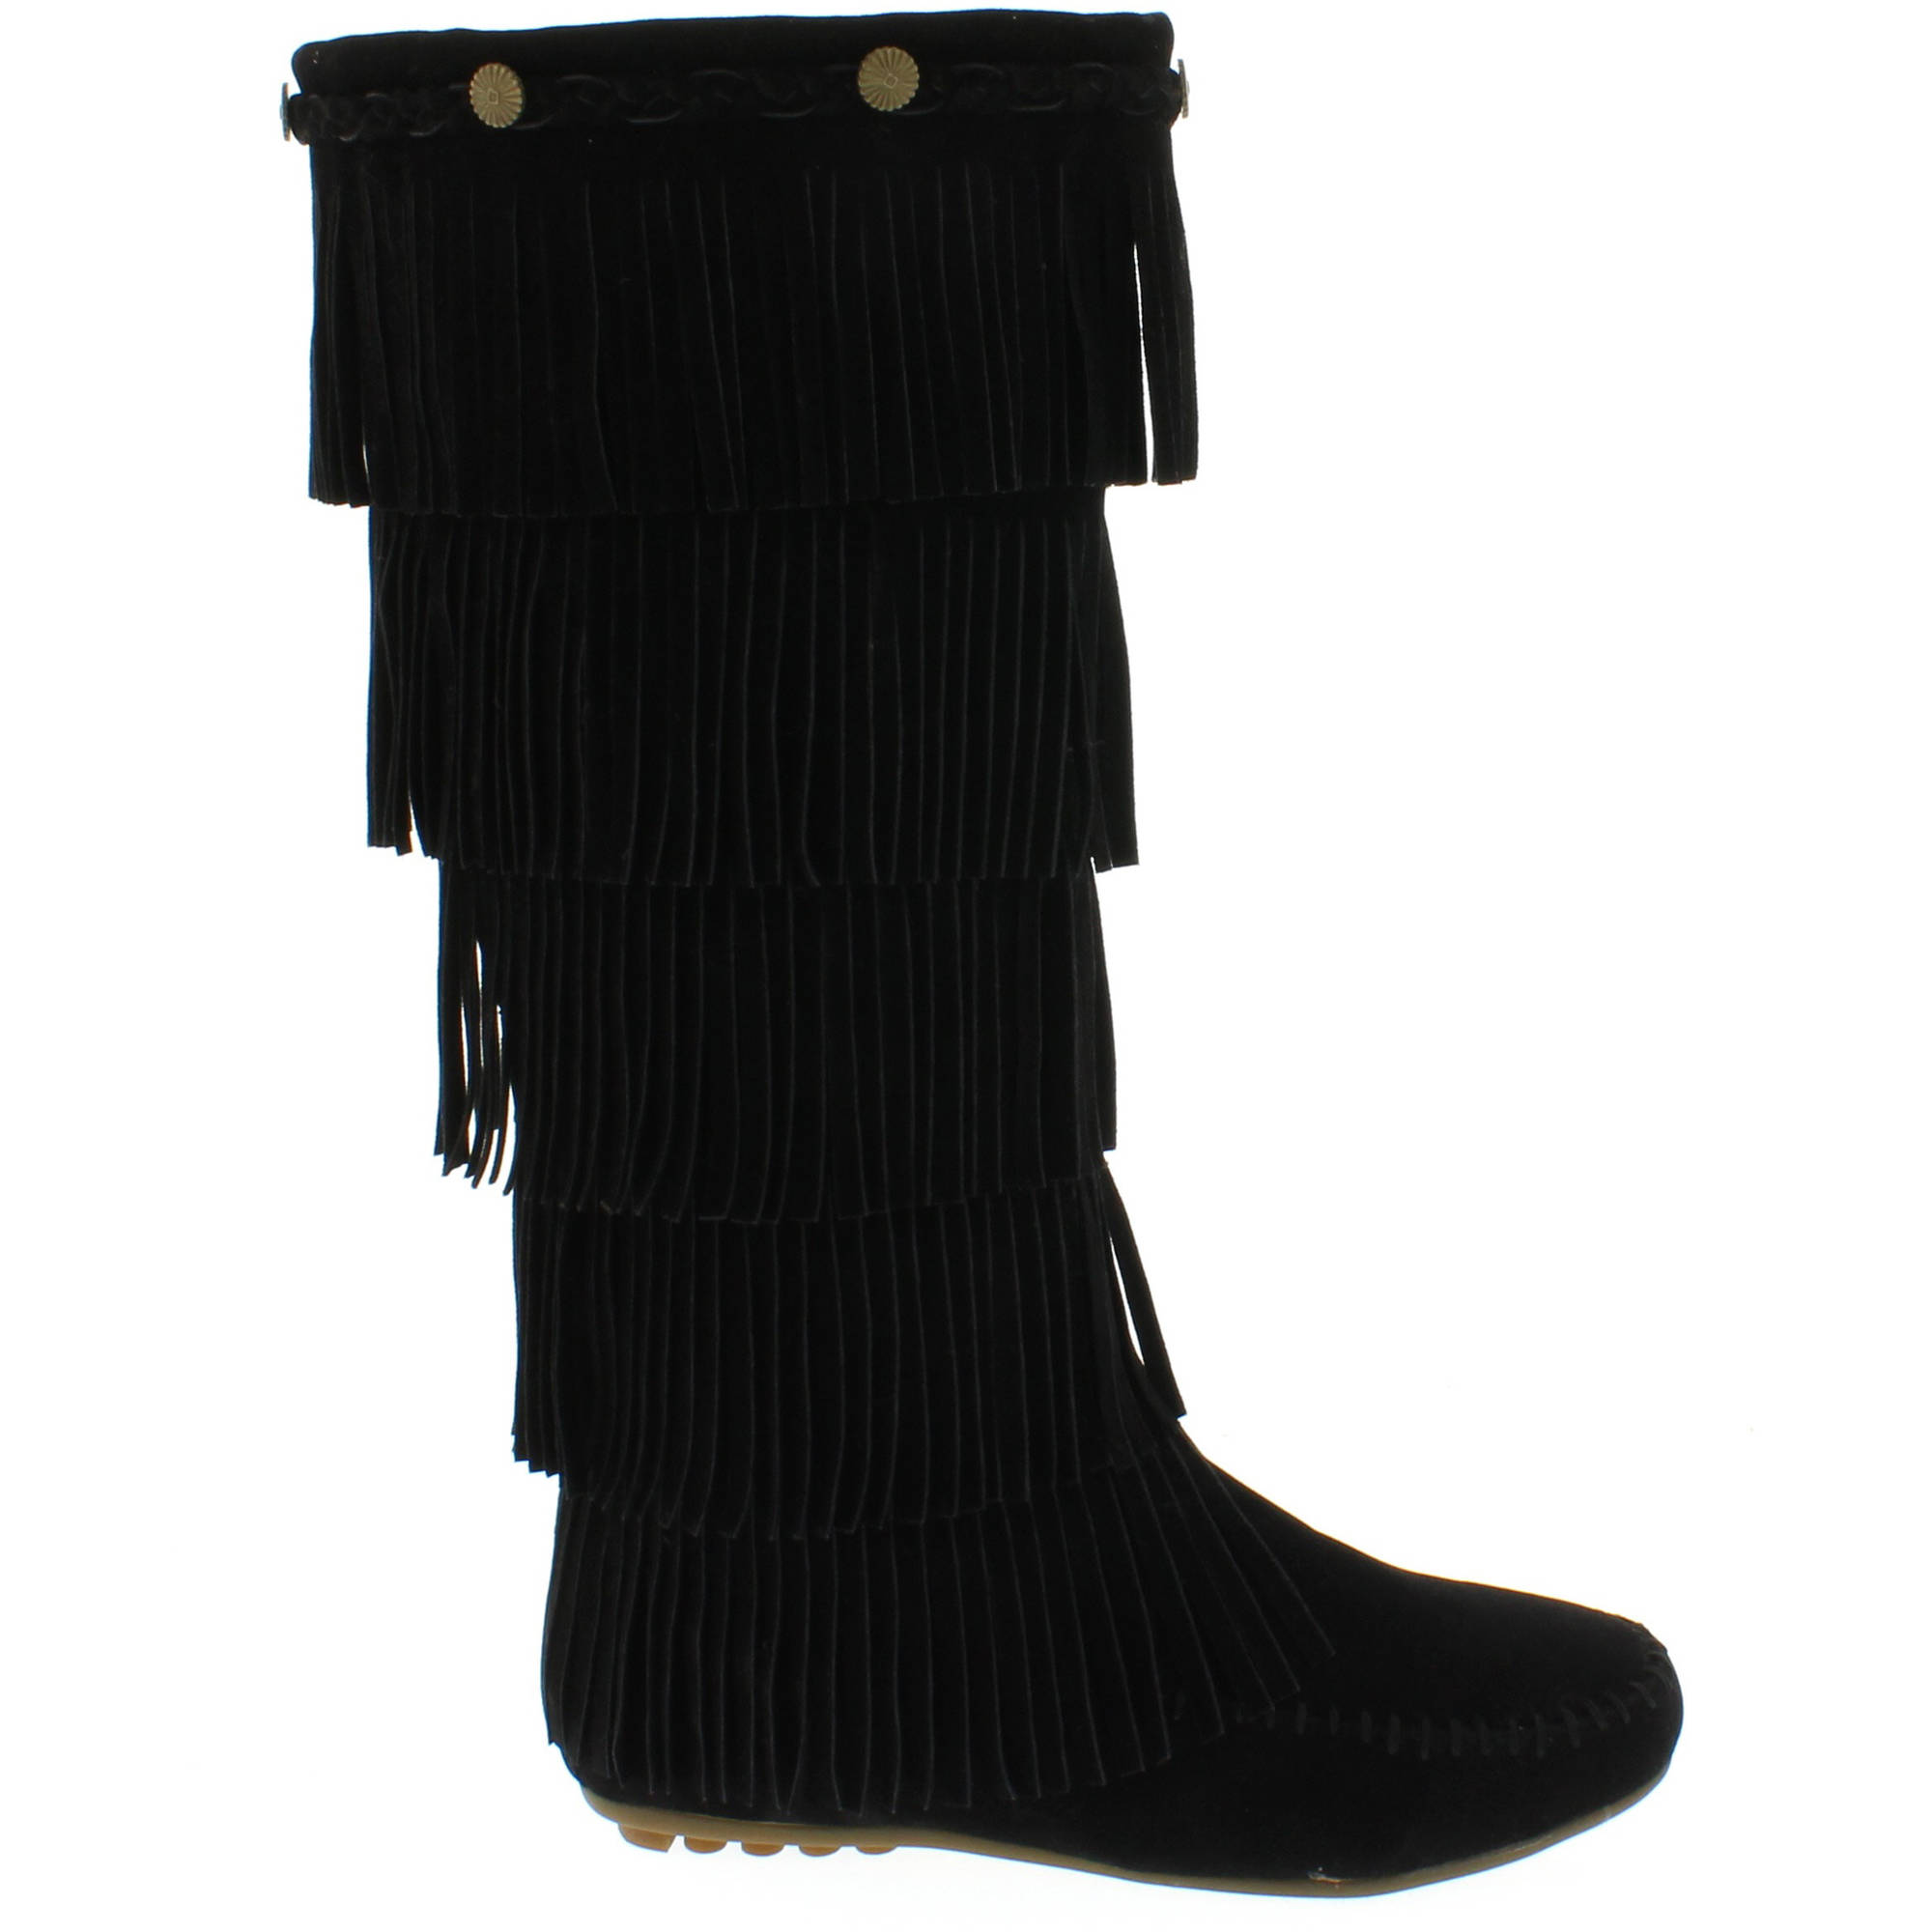 Shoes of Soul Women's Layer Fringe Boots - image 2 of 4